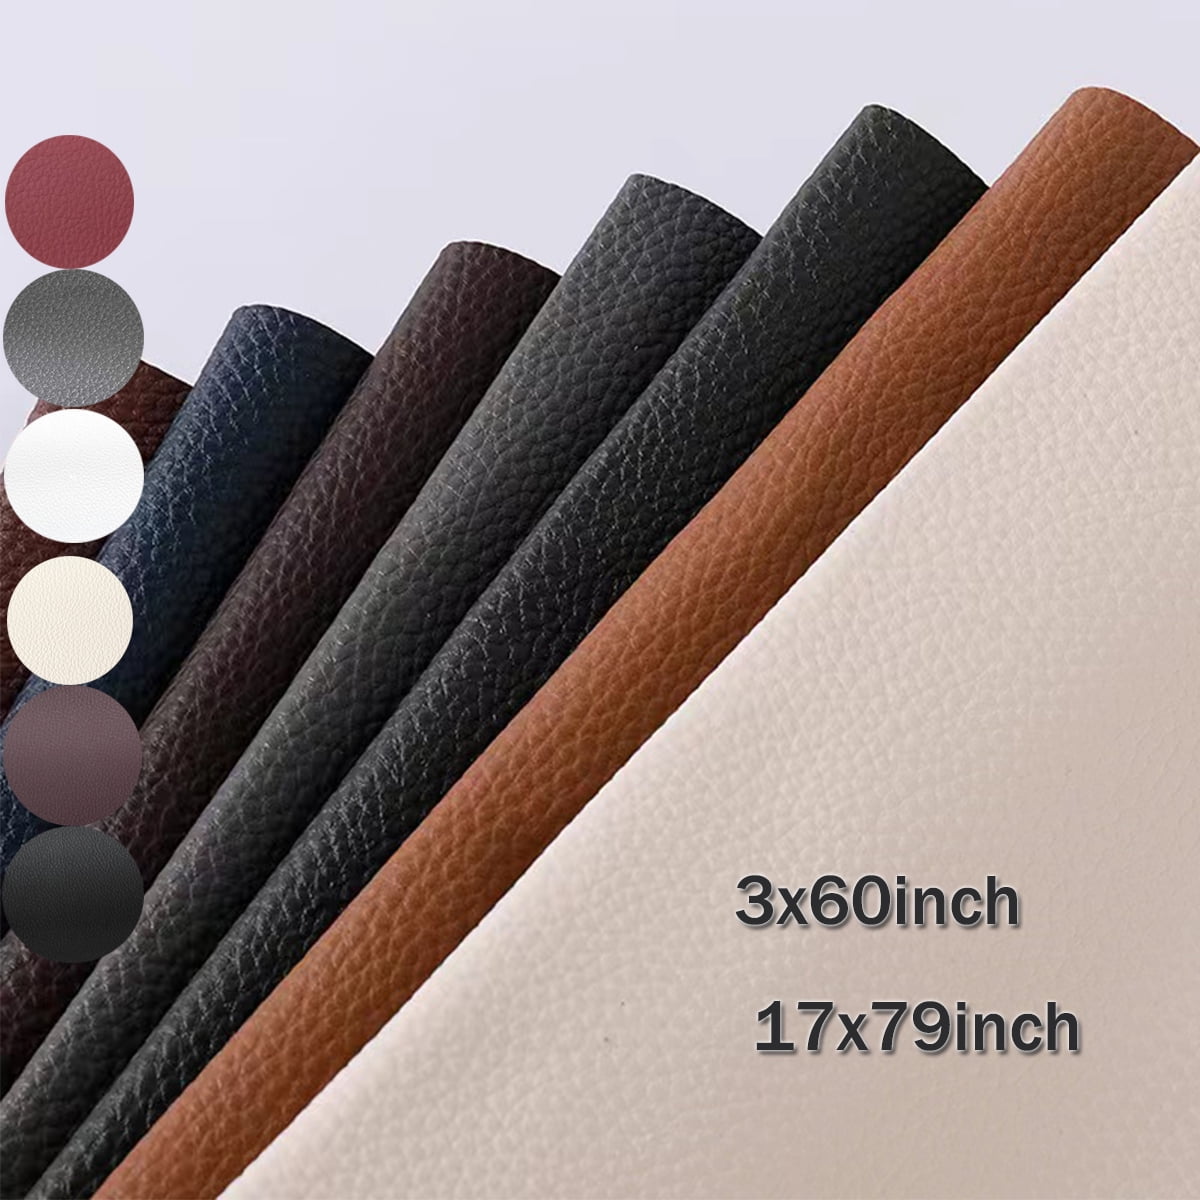 Leather Tape 3X60 Inch Self-Adhesive Leather Repair Patch for